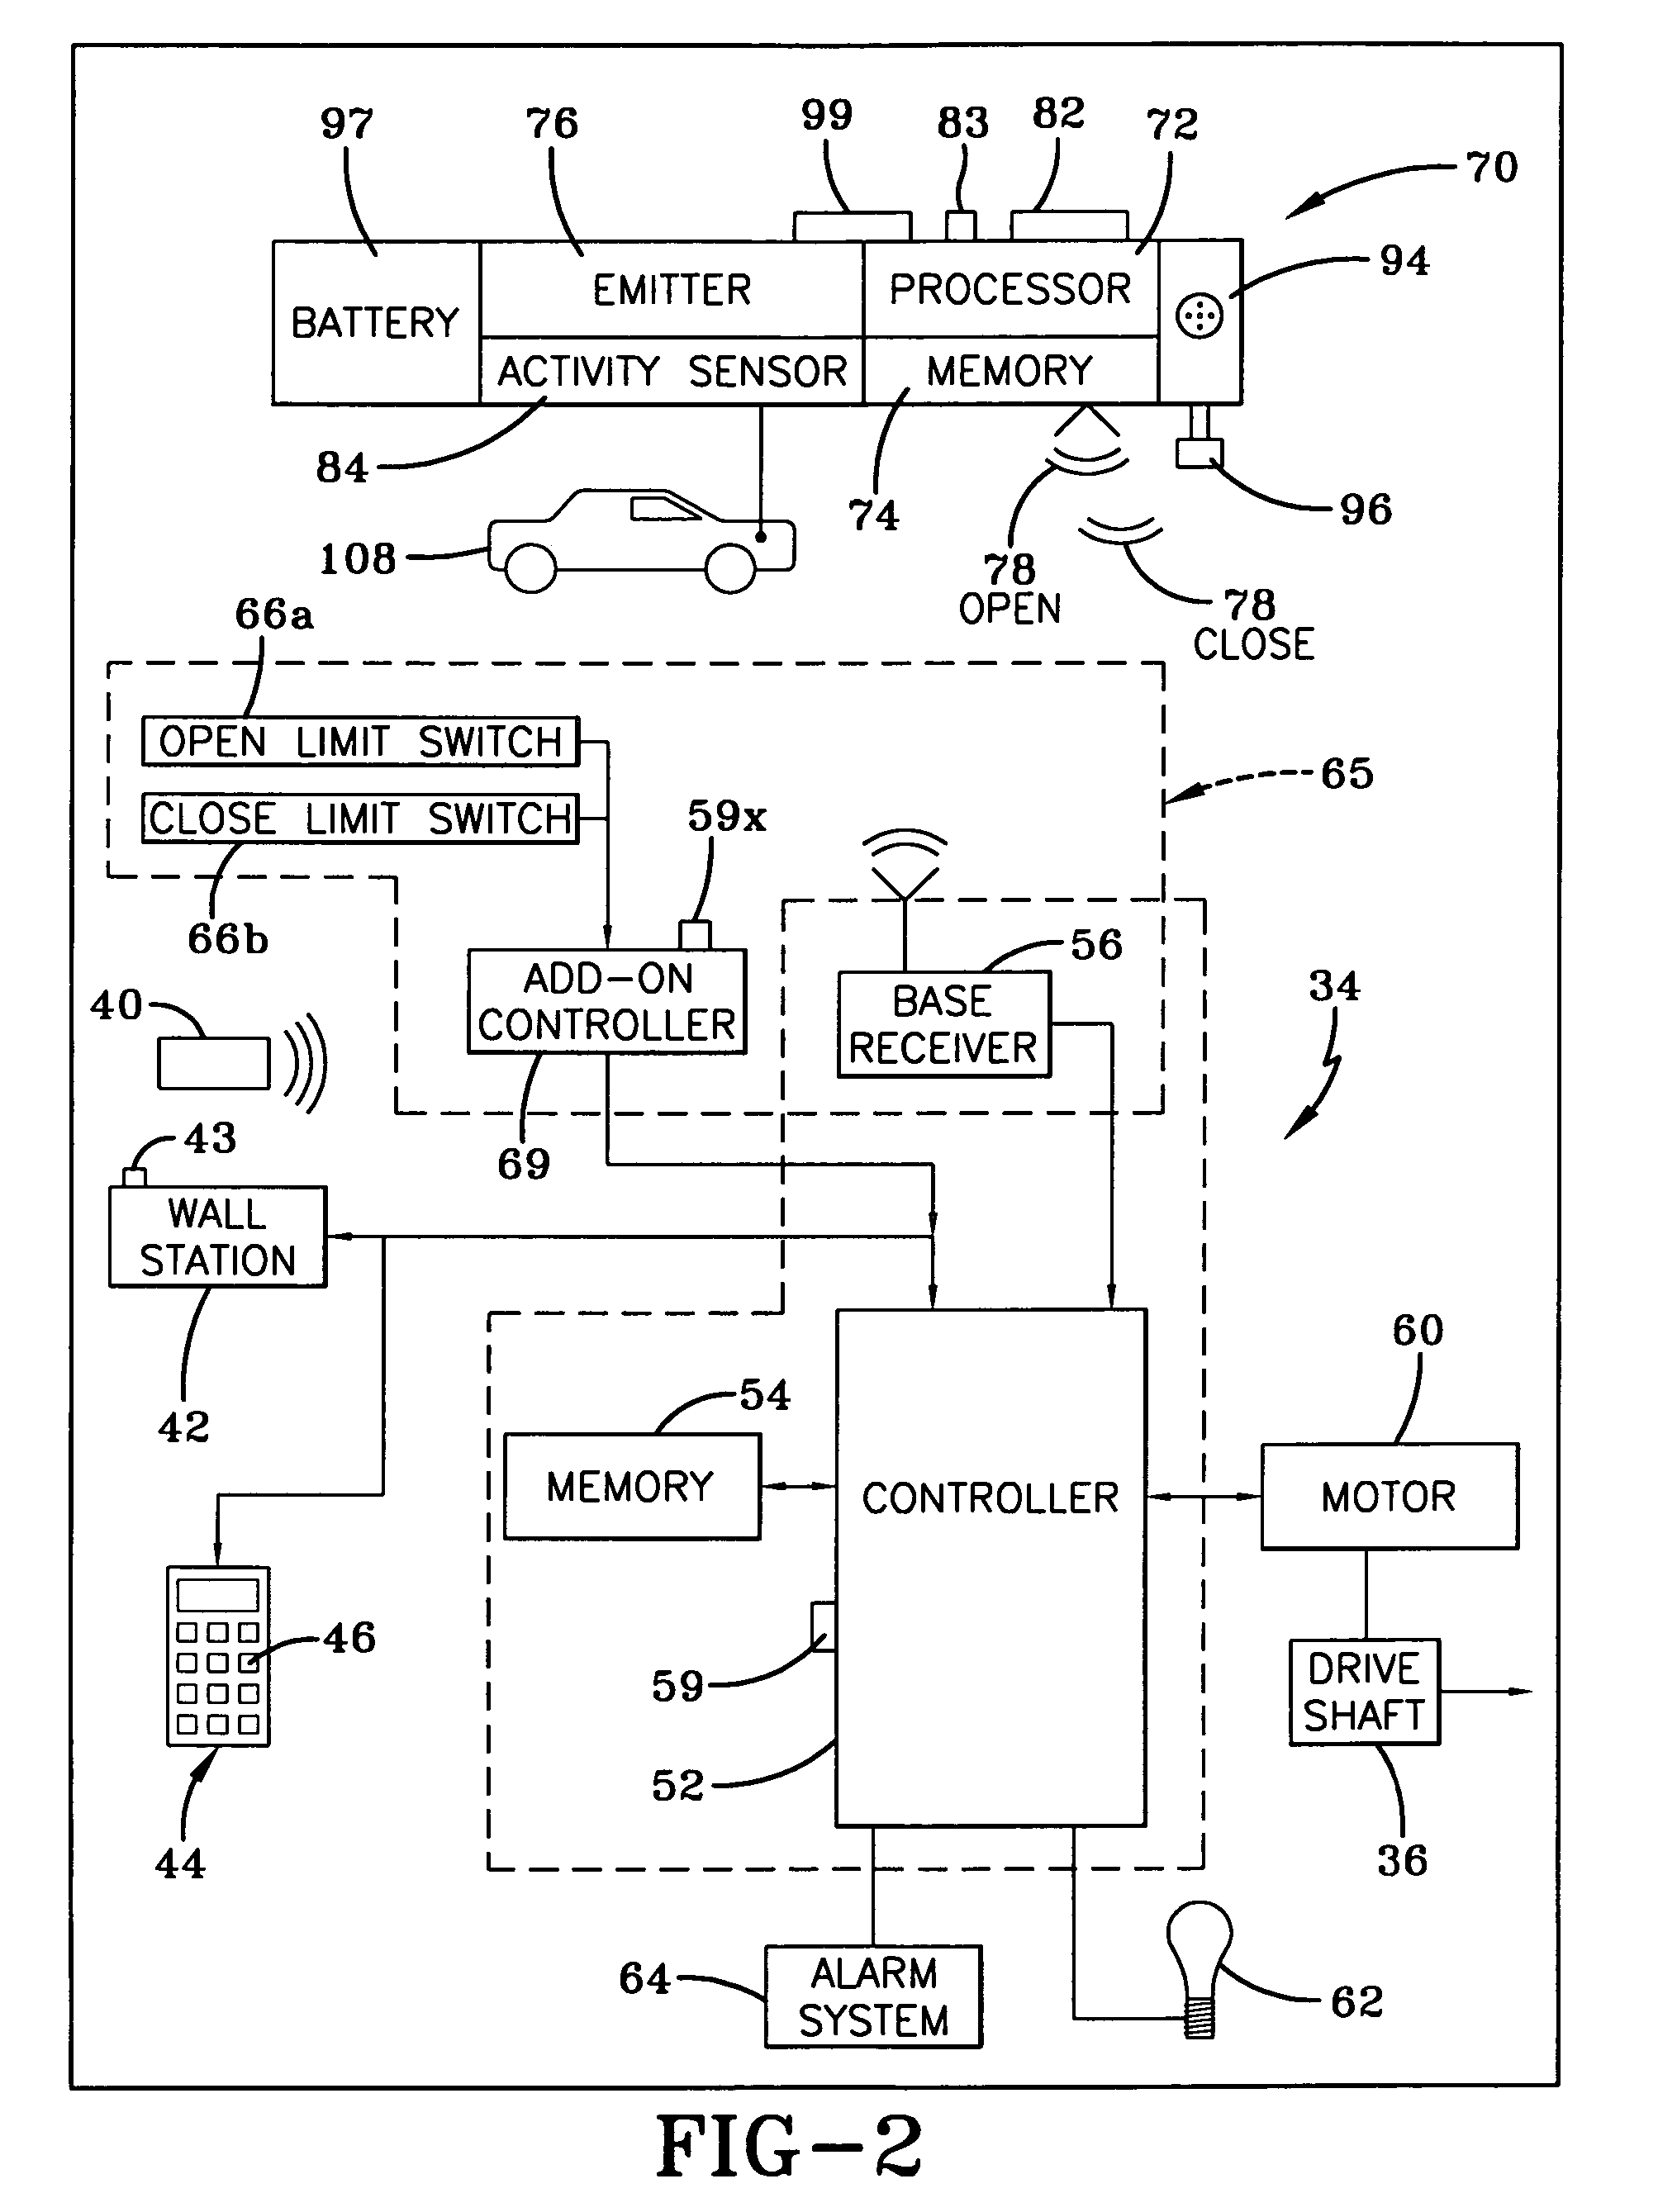 System and methods for automatically moving access barriers initiated by mobile transmitter devices